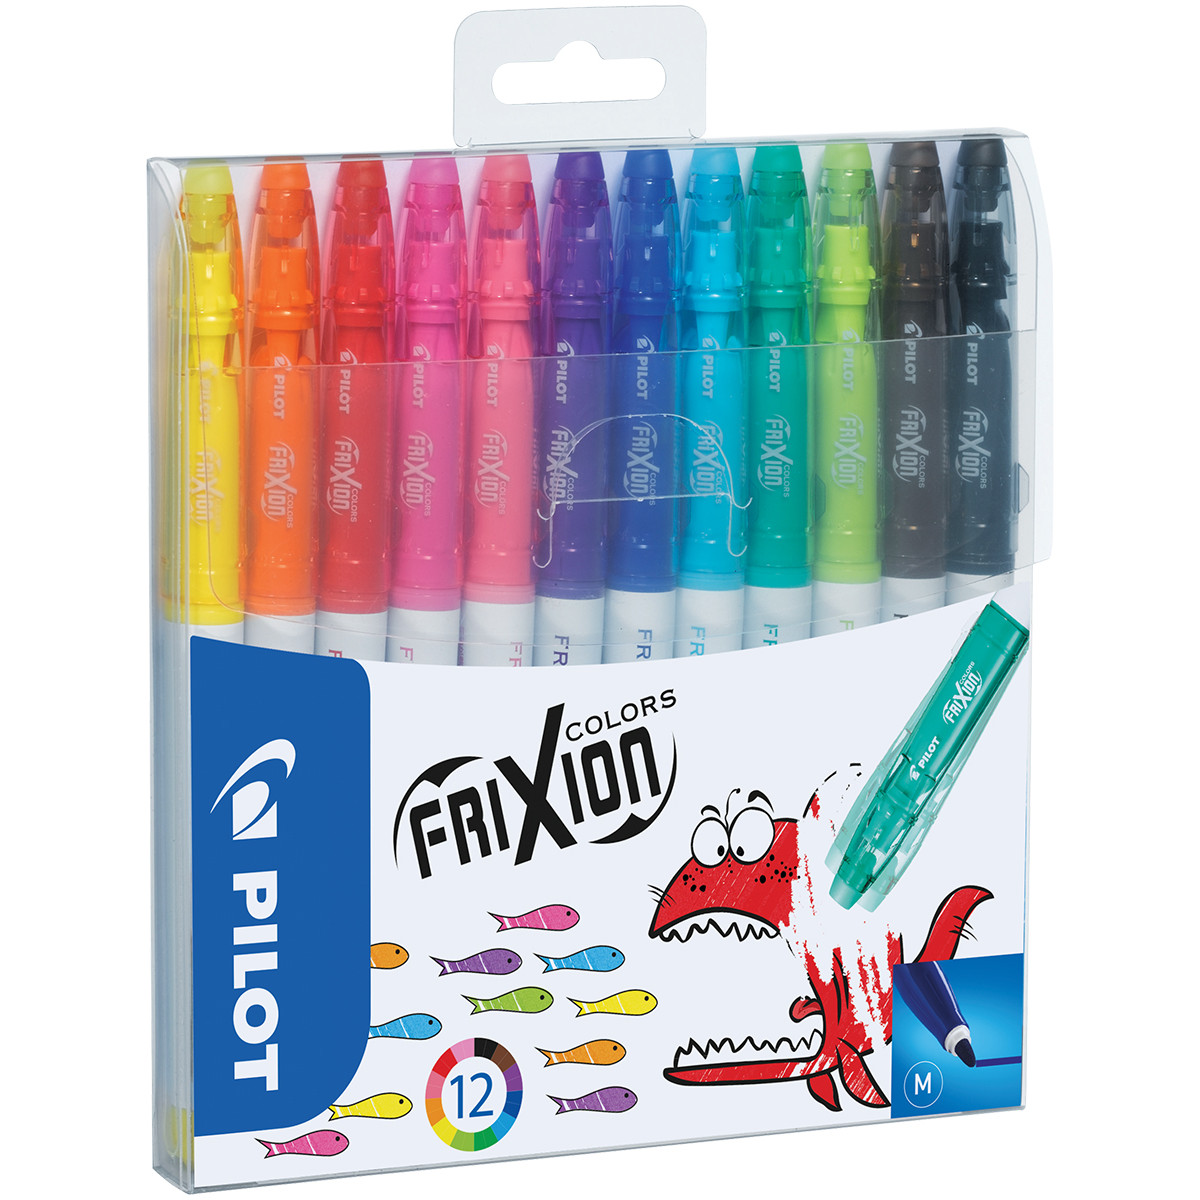 https://www.theonlinepencompany.com/cache/1210/pilot/frixion-colors/423888.jpg